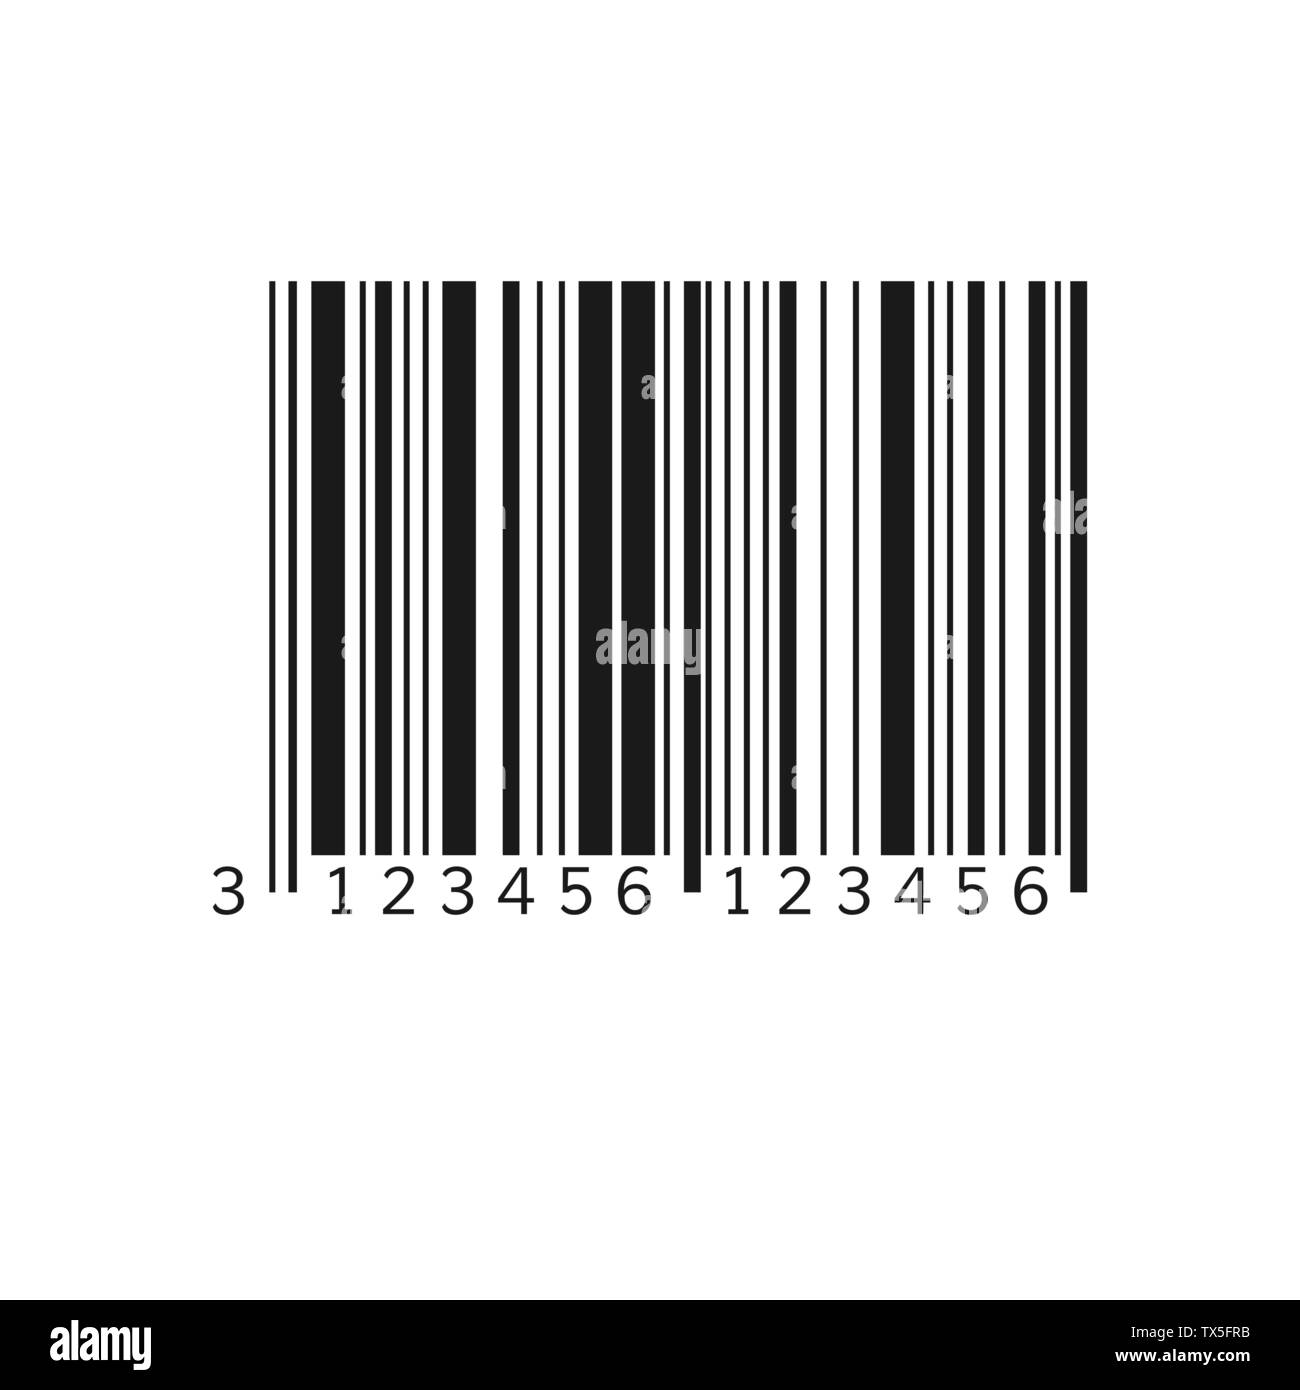 Unique bar code. Striped identification information about product. Vector illustration isolated on white background Stock Vector